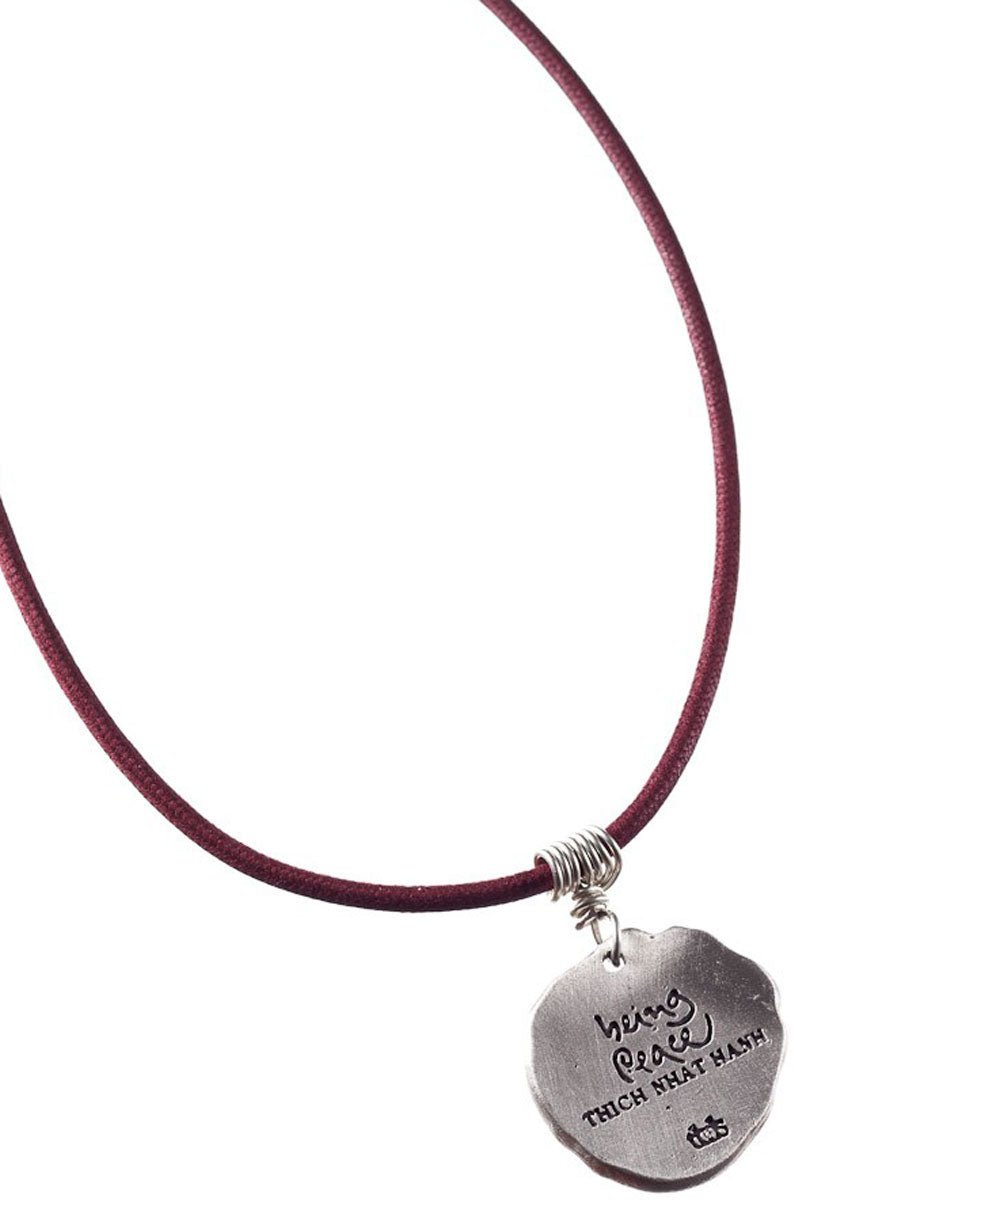 Thich Nhat Hanh Peace Quote Pendant Necklace - Necklaces